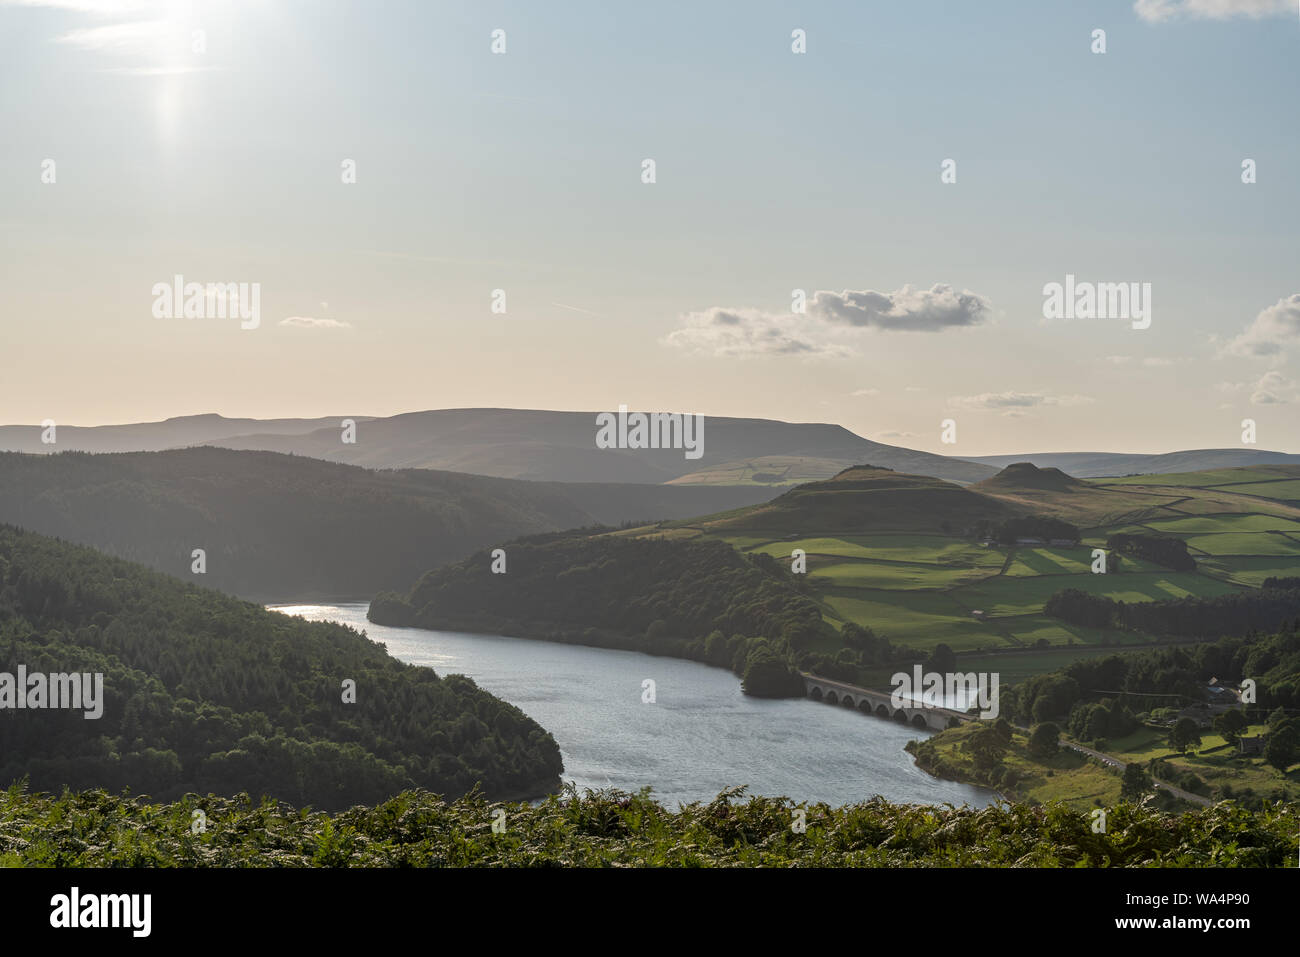 View of the Ashopton Viaduct, Ladybower Reservoir, and Crook Hill in the Derbshire Peak District National Park, England, UK. Stock Photo